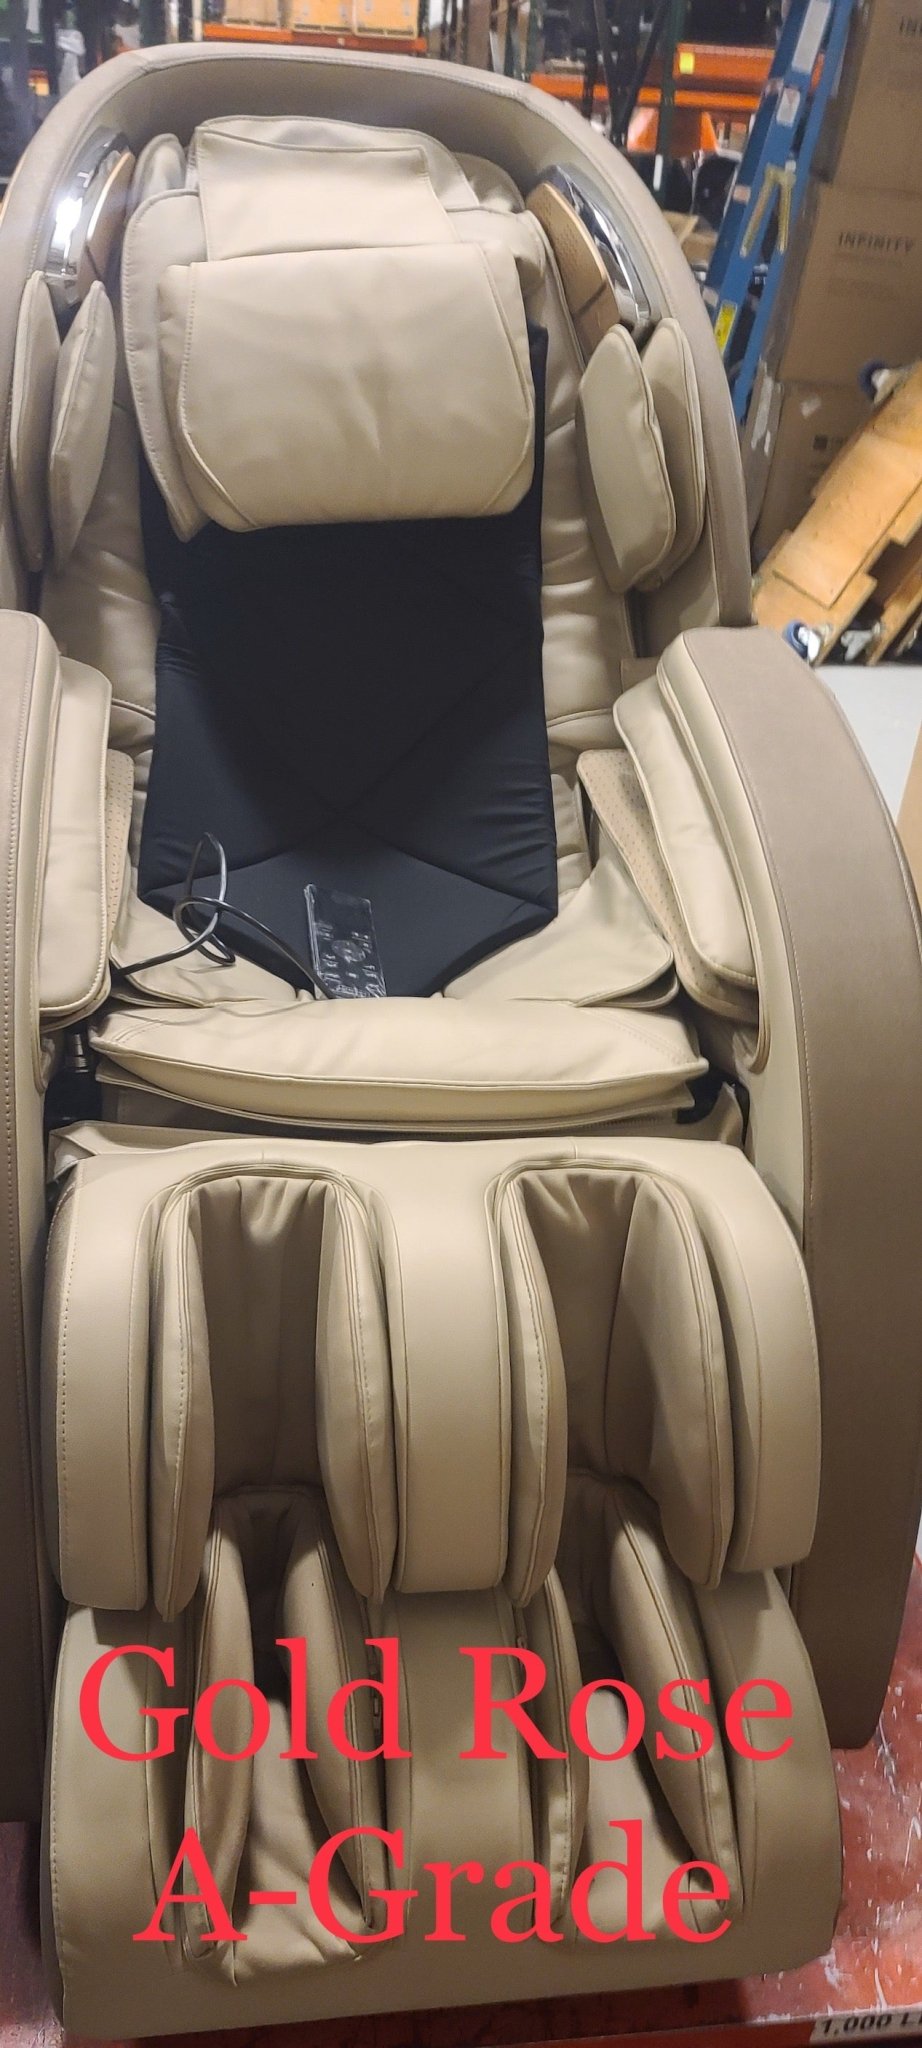 infinityMassage ChairsInfinity Genesis 3D/4D Massage Chair (Certified Pre-Owned)Gold/TanMassage Chair Heaven